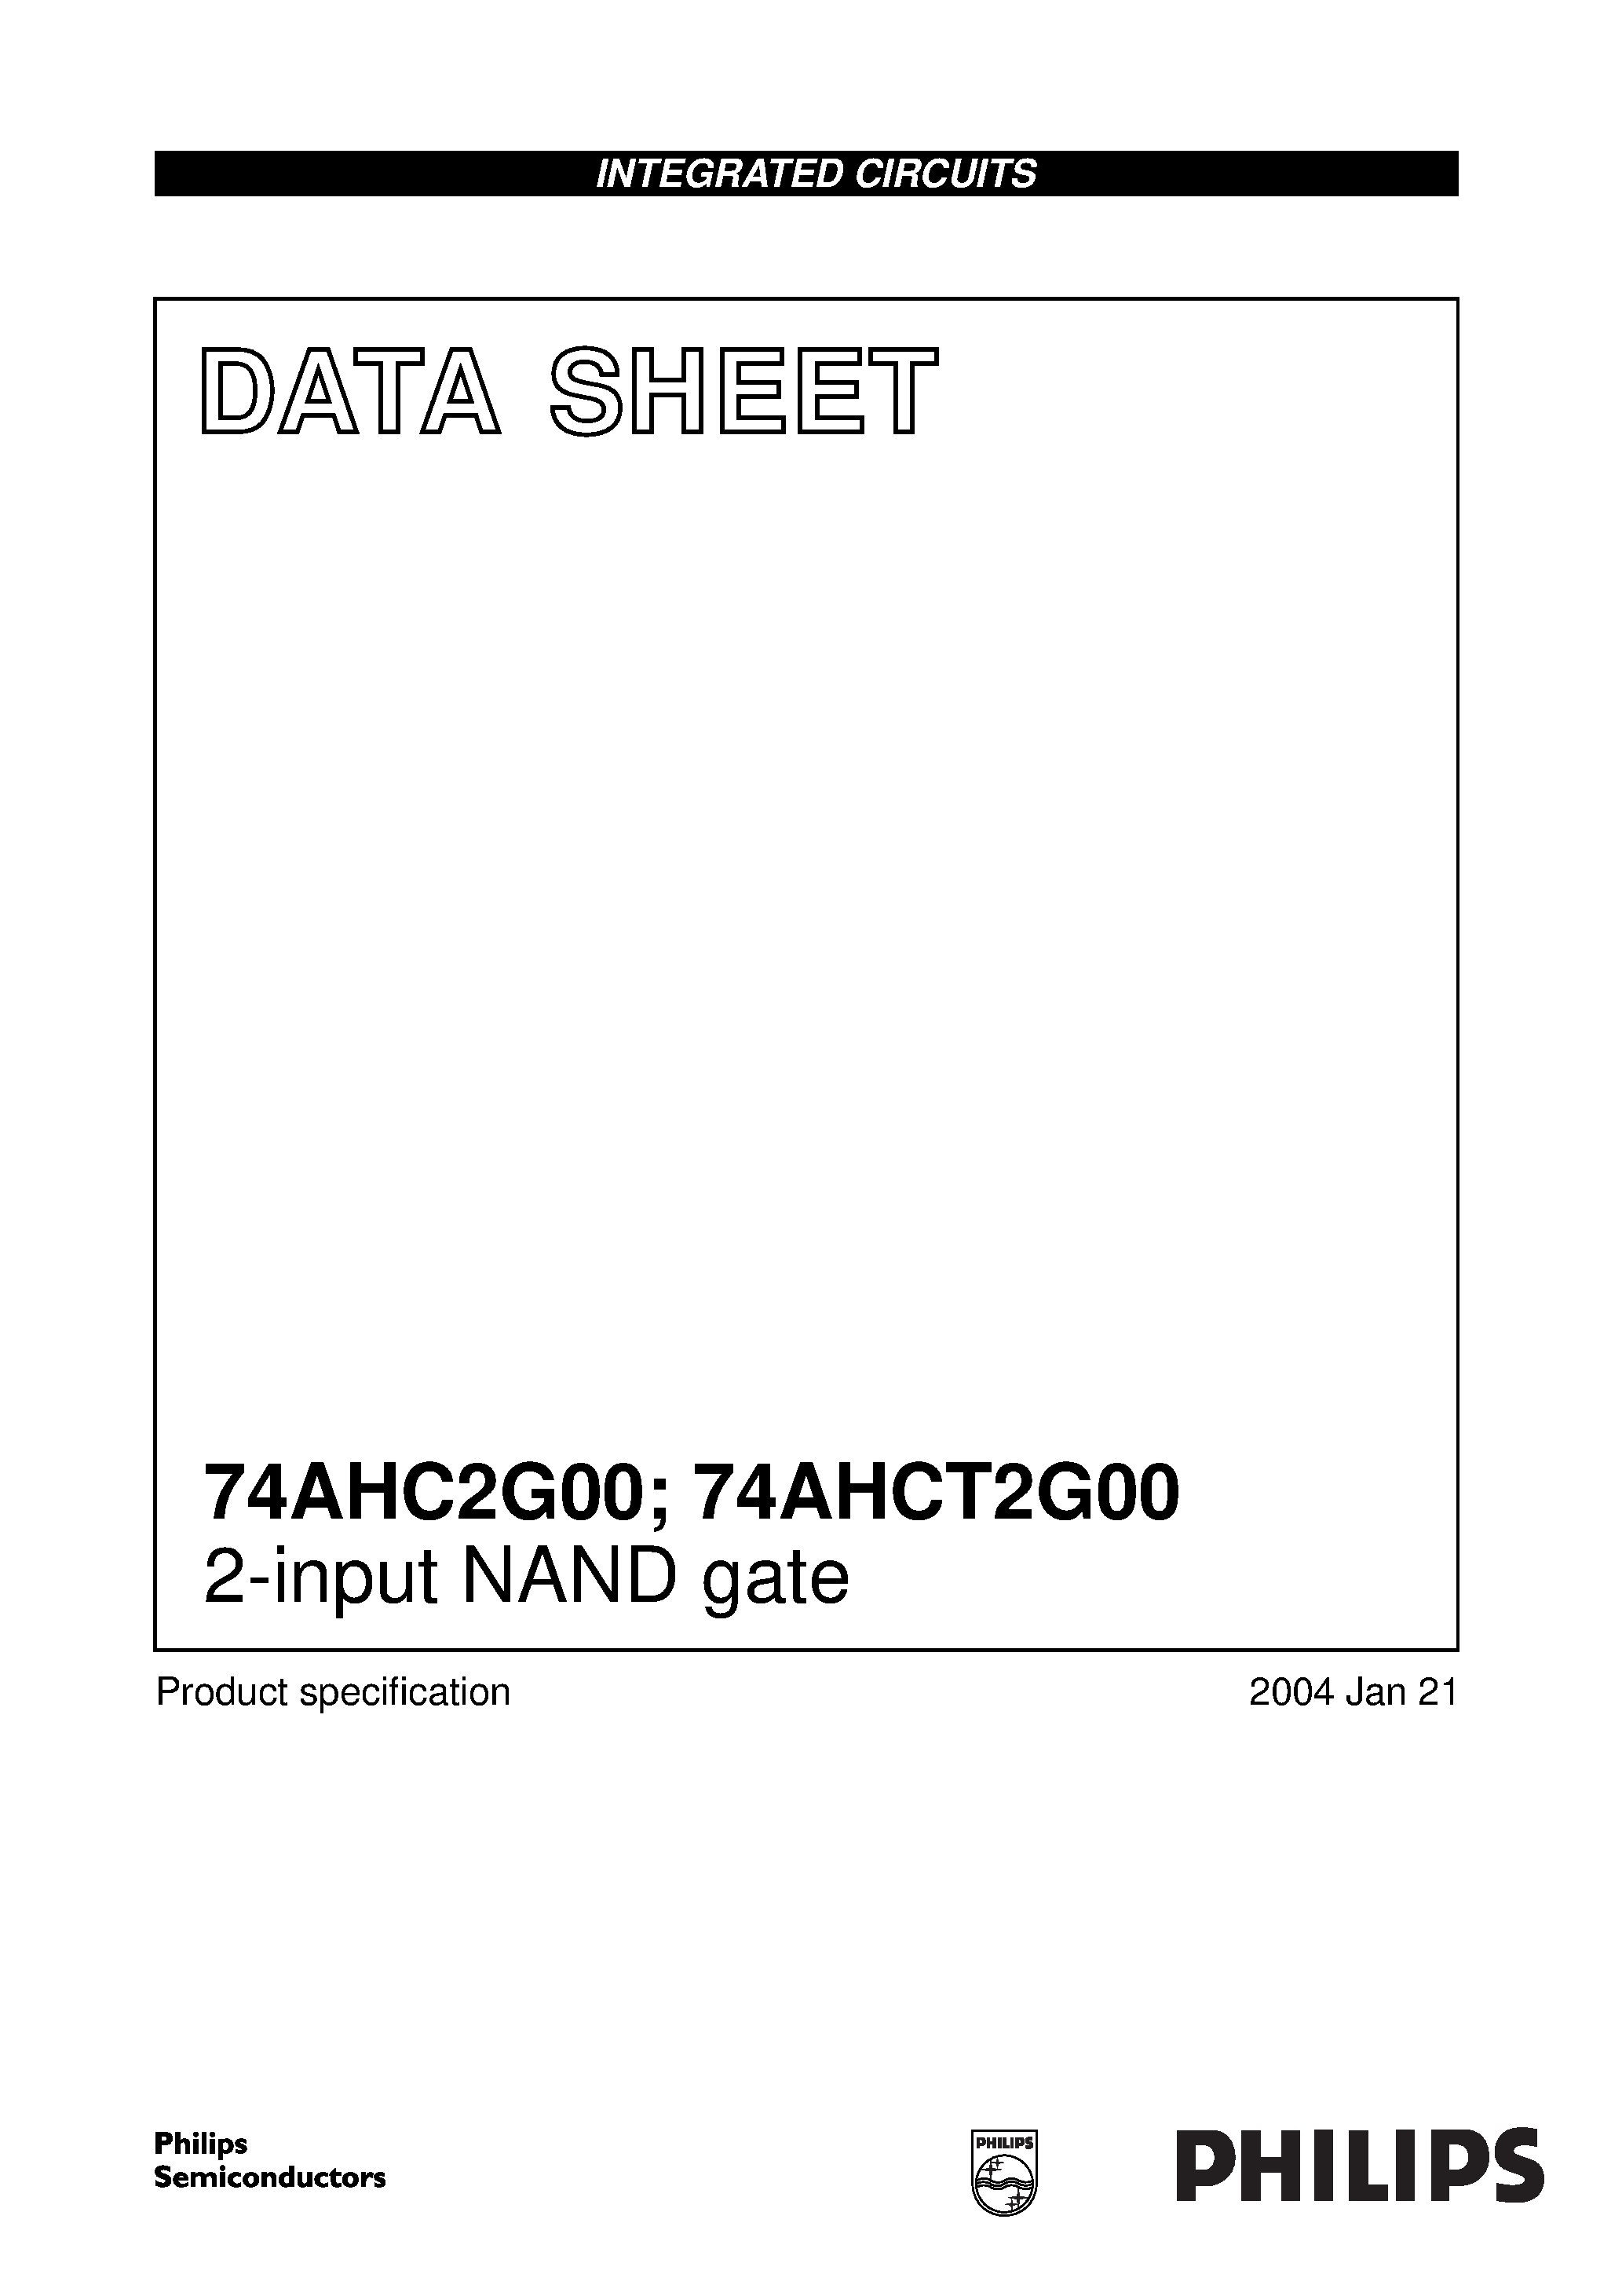 Datasheet 74AHC2G00 - The 74AHC2G/AHCT2G00 is a high-speed Si-gate CMOS device page 1